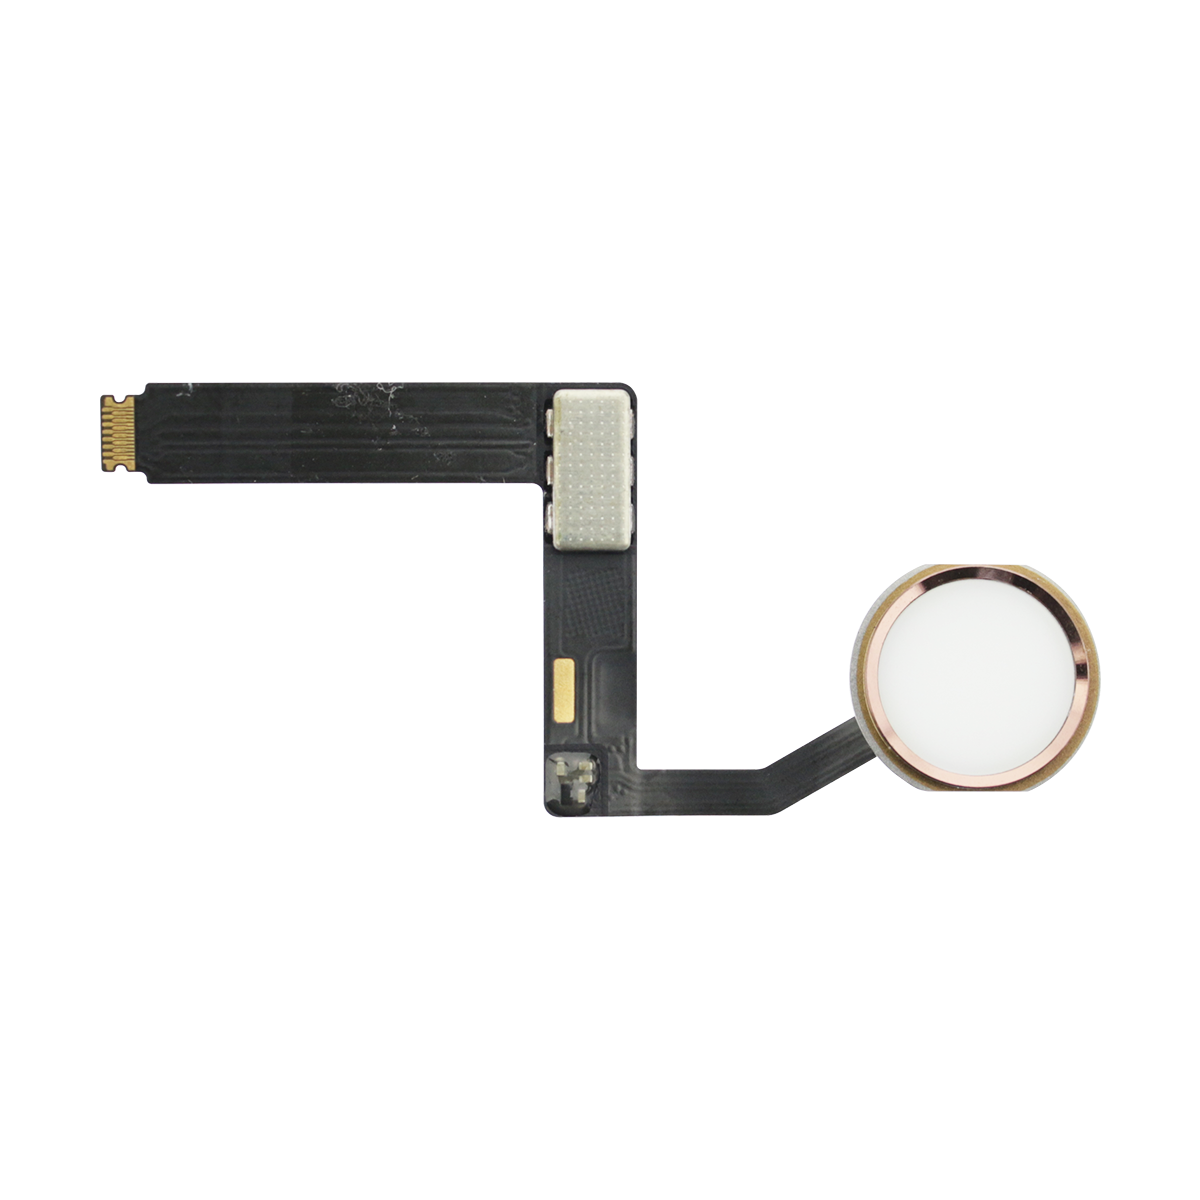 ipad-pro-9-7-home-button-assembly-rose-gold_S4VIBKZTYIMM.png